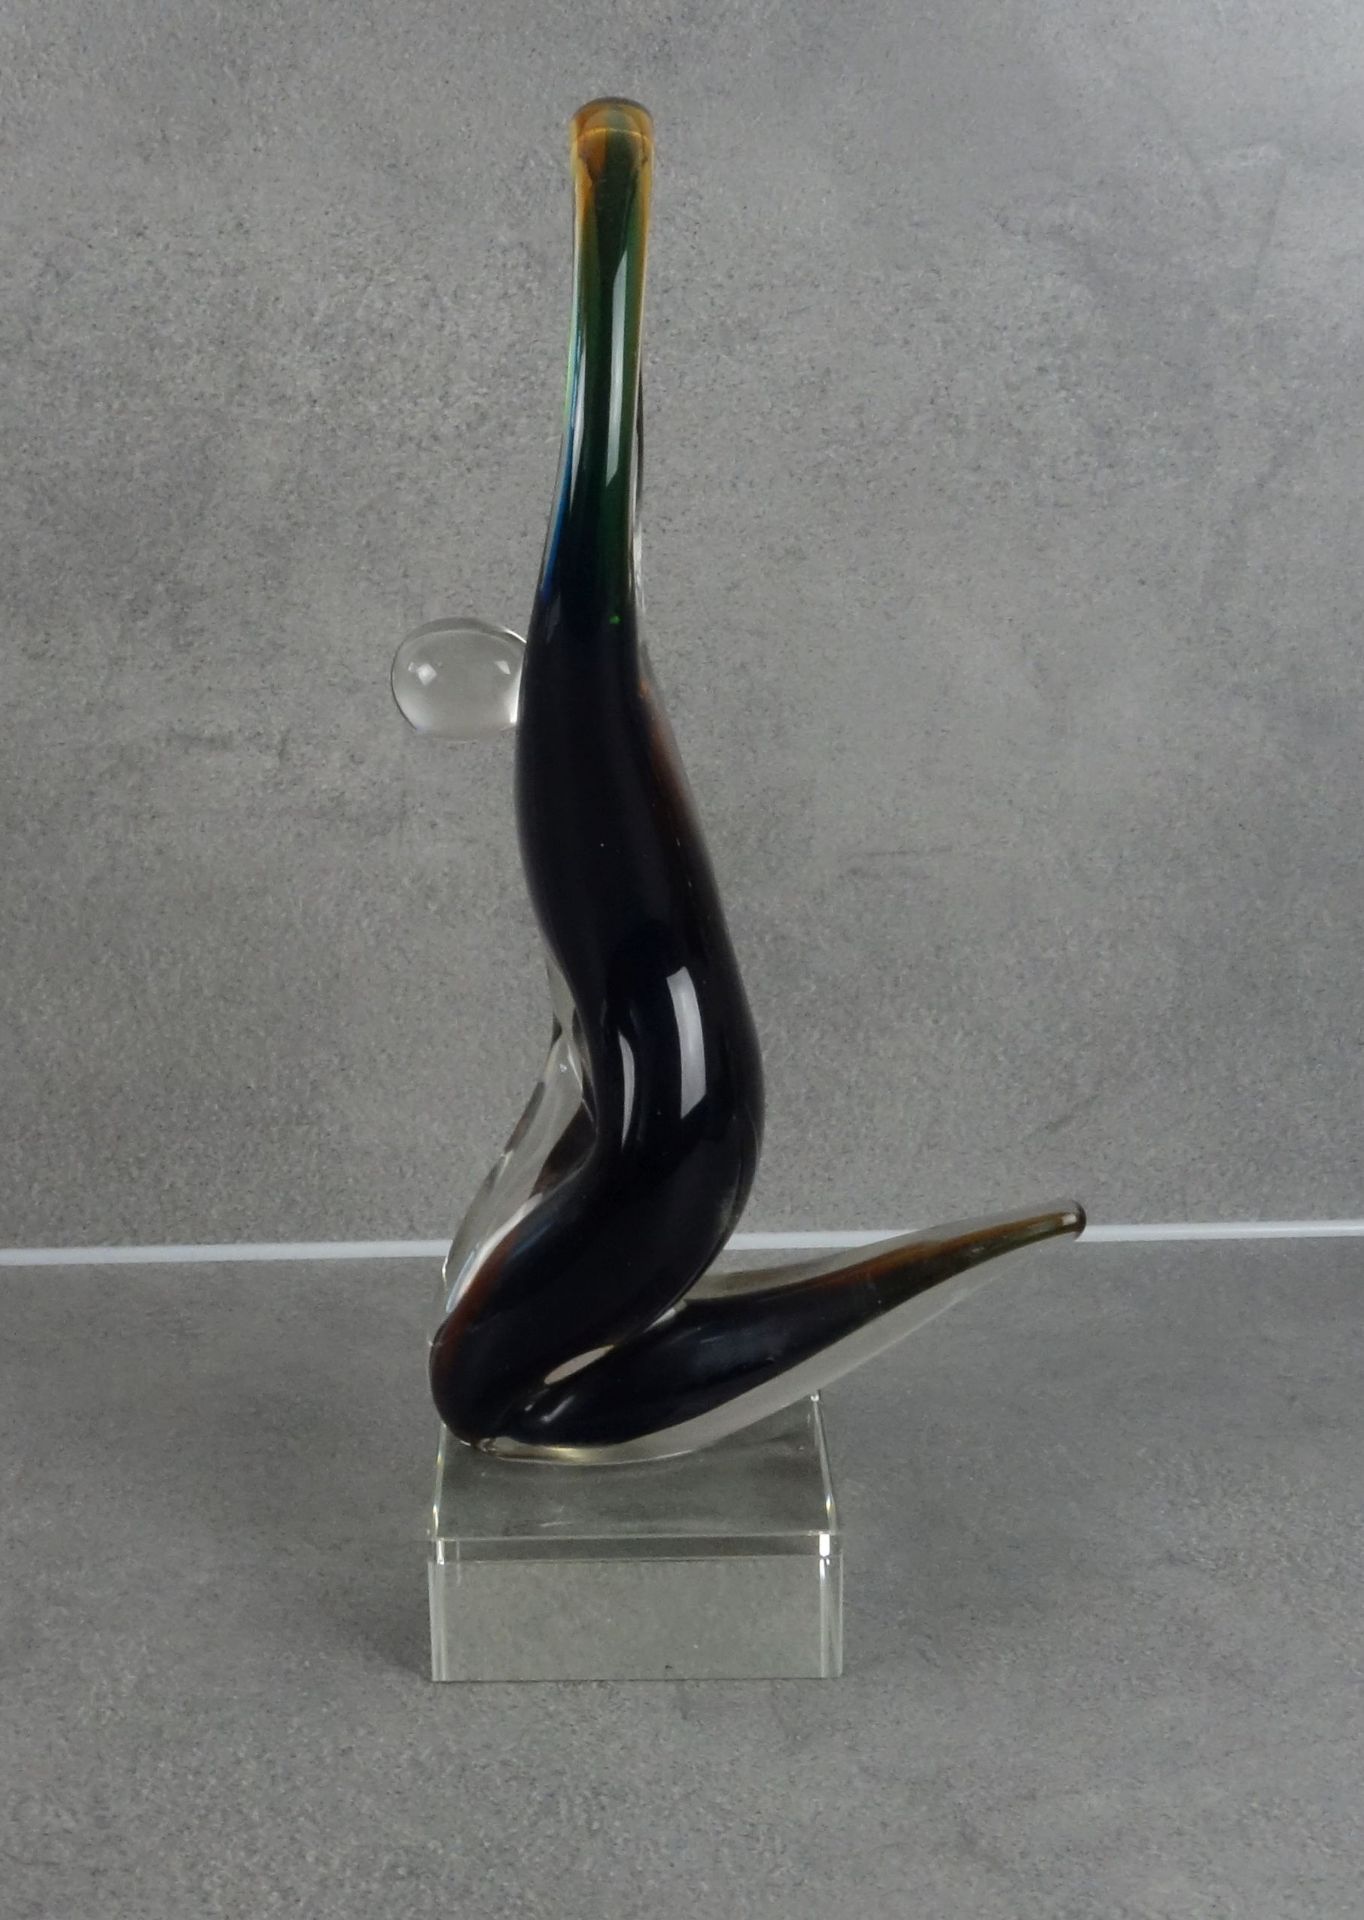 GLASS SCULPTURE "SQUATTING" - Image 2 of 4